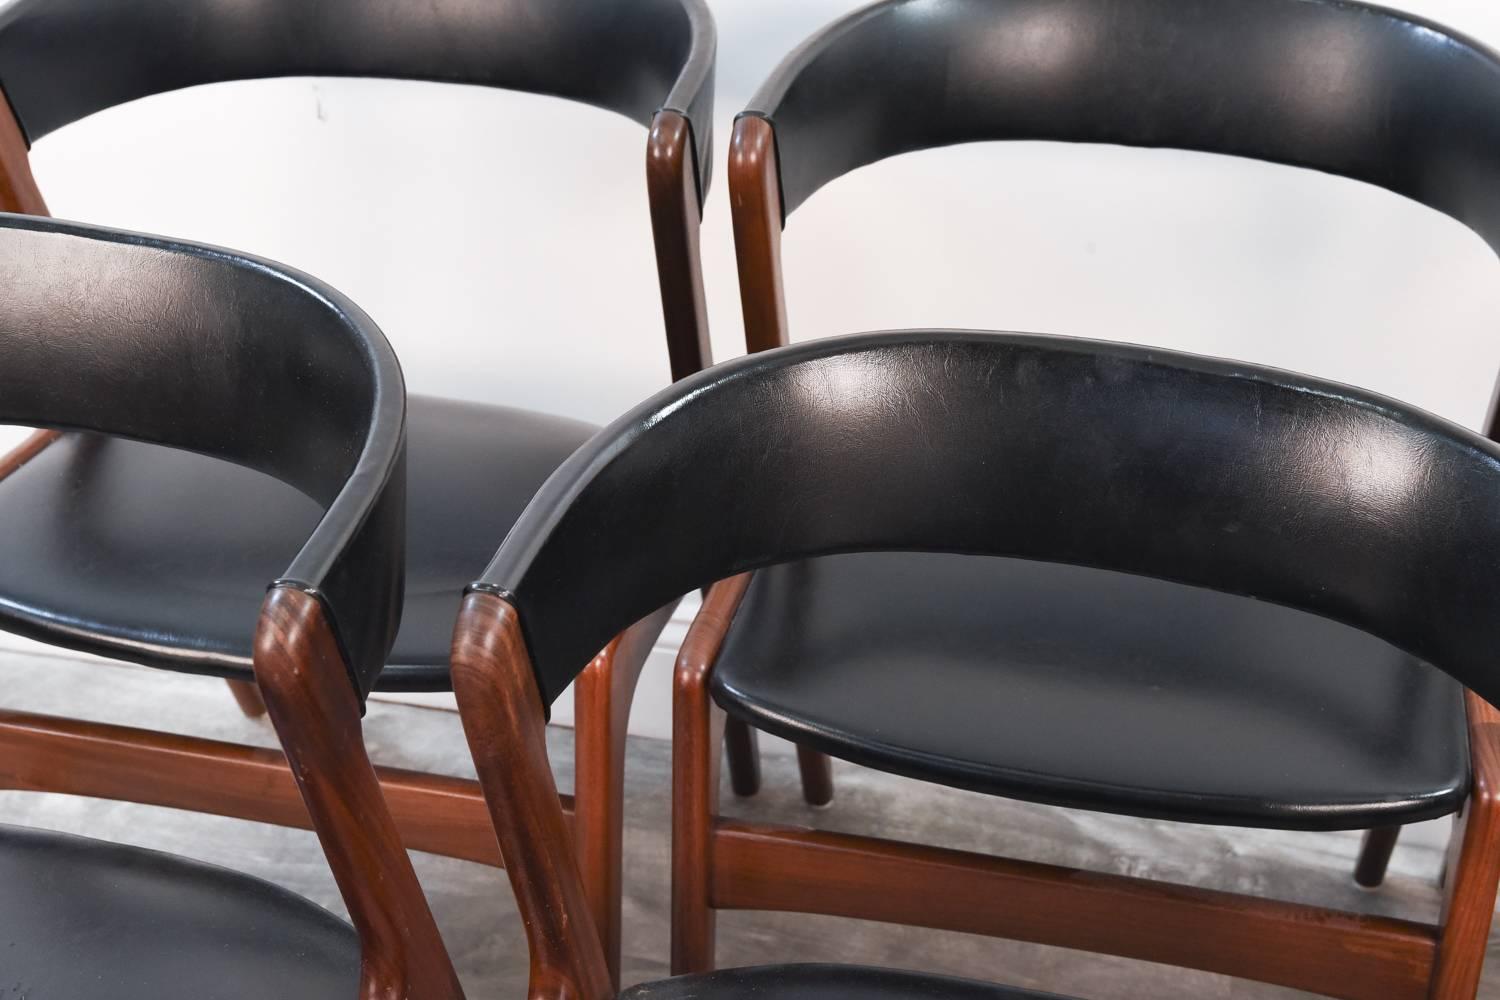 This set of six side or dining chairs was designed by Danish architect Oman Jr. in the 1960's. Wonderful teak frames with original back and seat upholstered in black skai. Very interesting form.